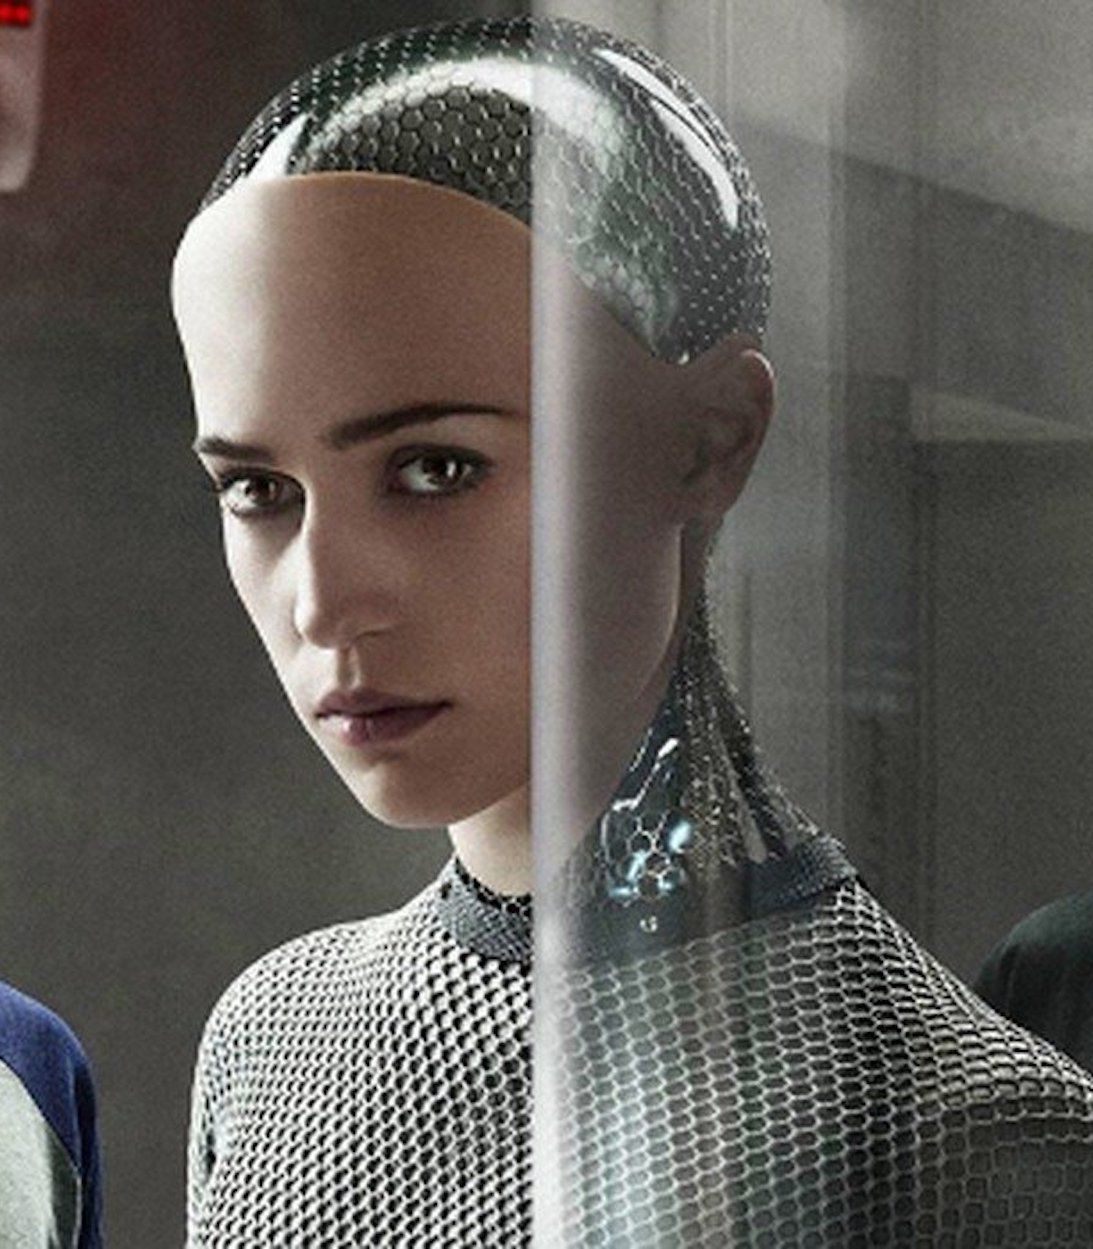 Ava looking at the camera in Ex Machina